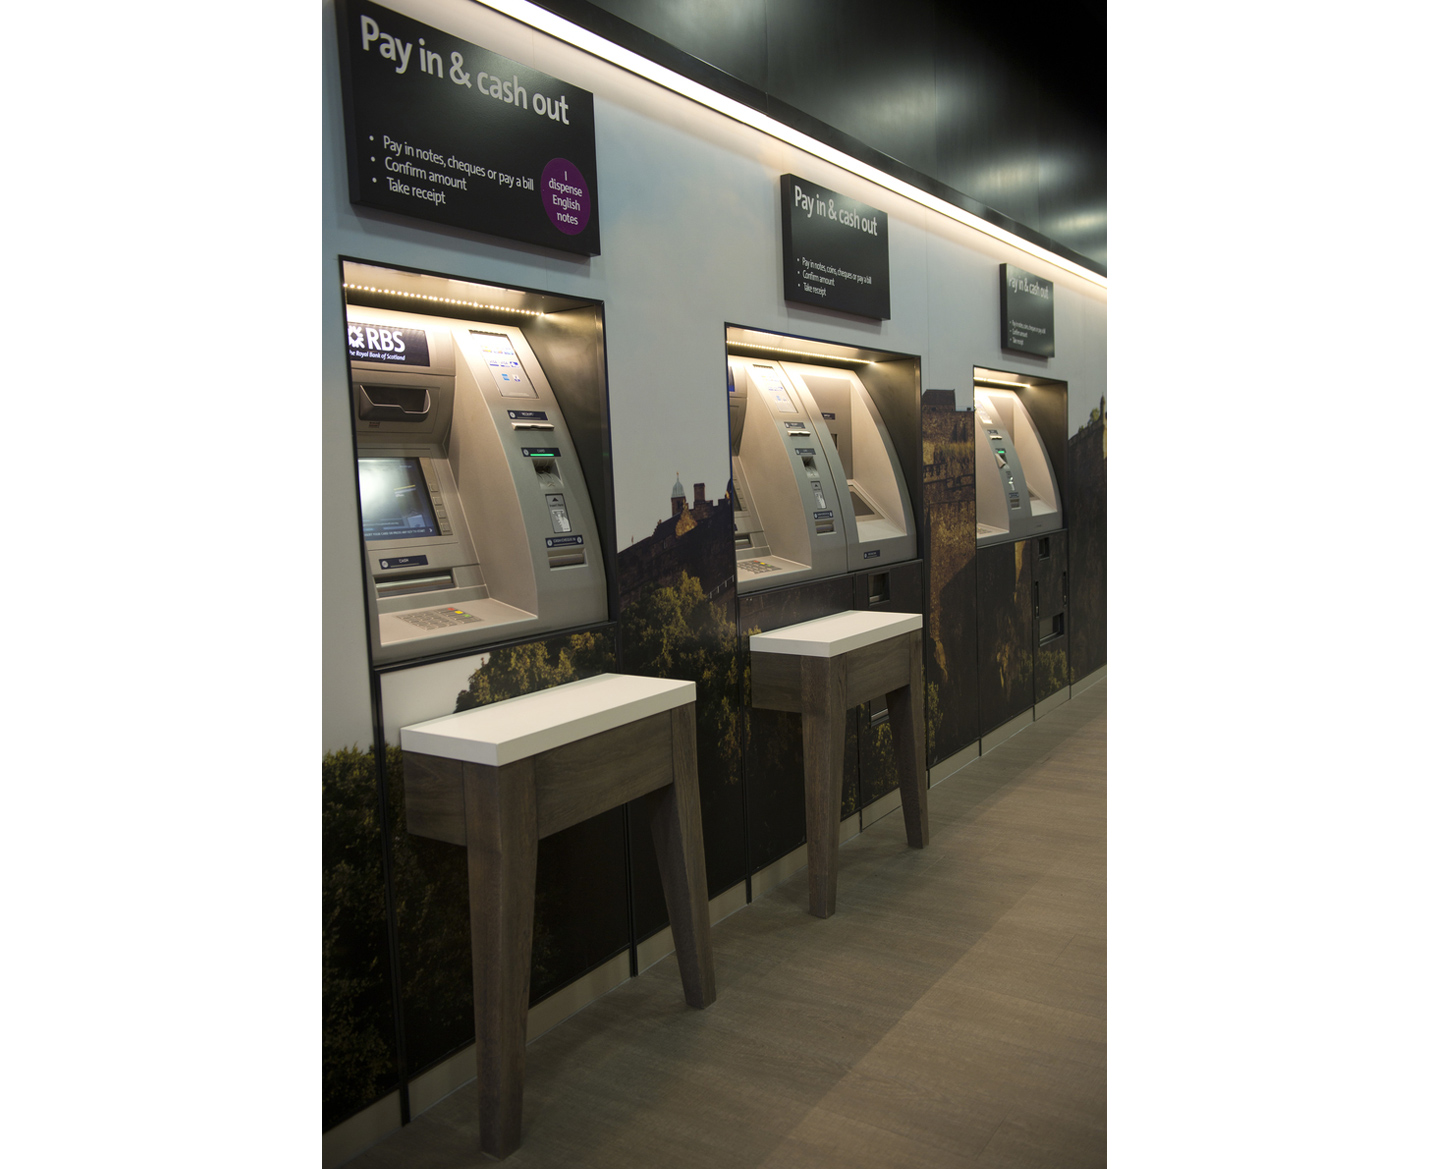 Royal Bank of Scotland smart ATM technology and services